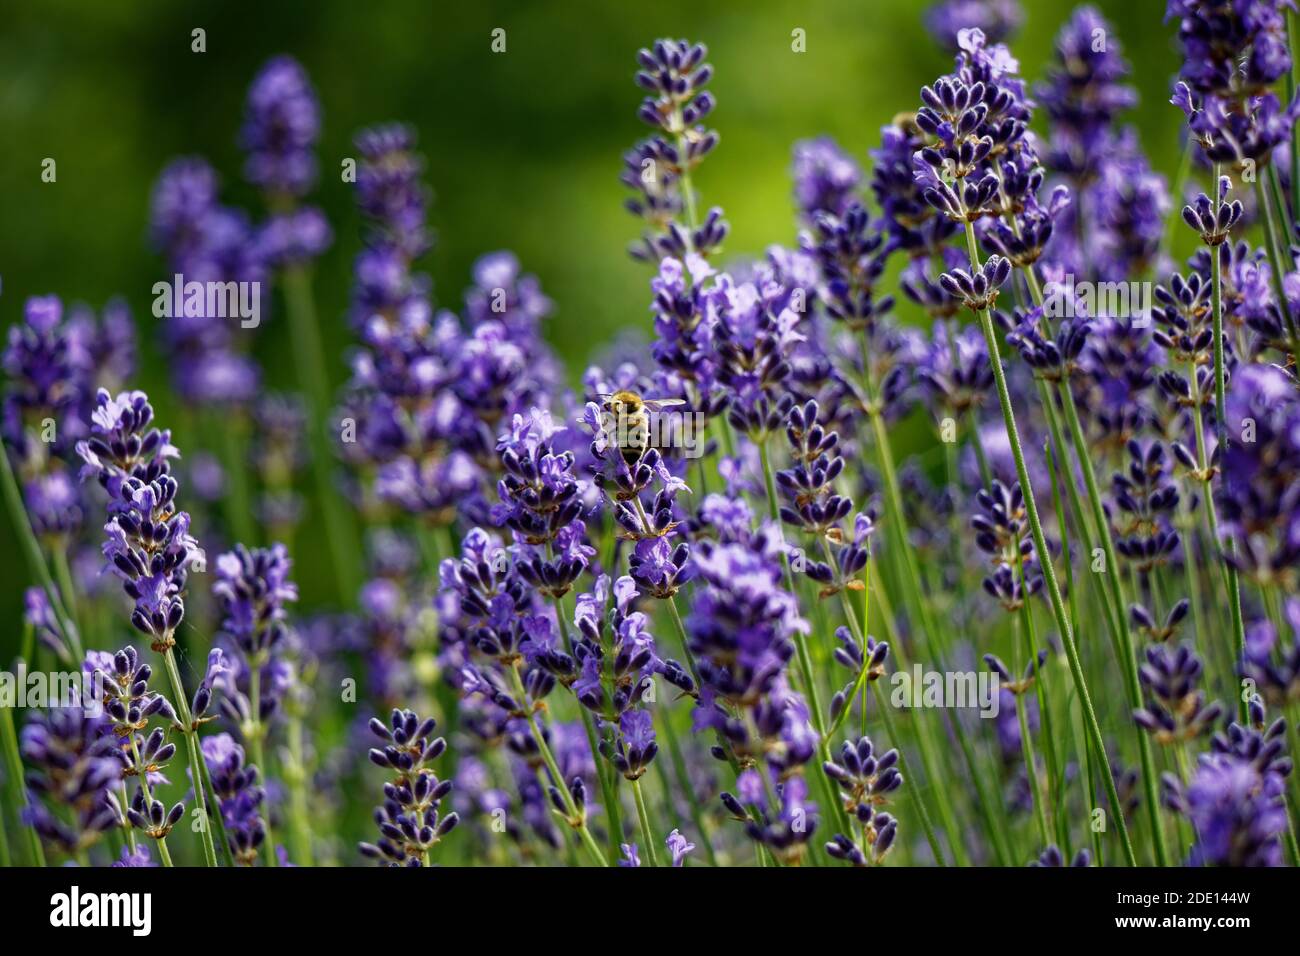 Closeup view of a lavender bush and bee collecting nectar Stock Photo